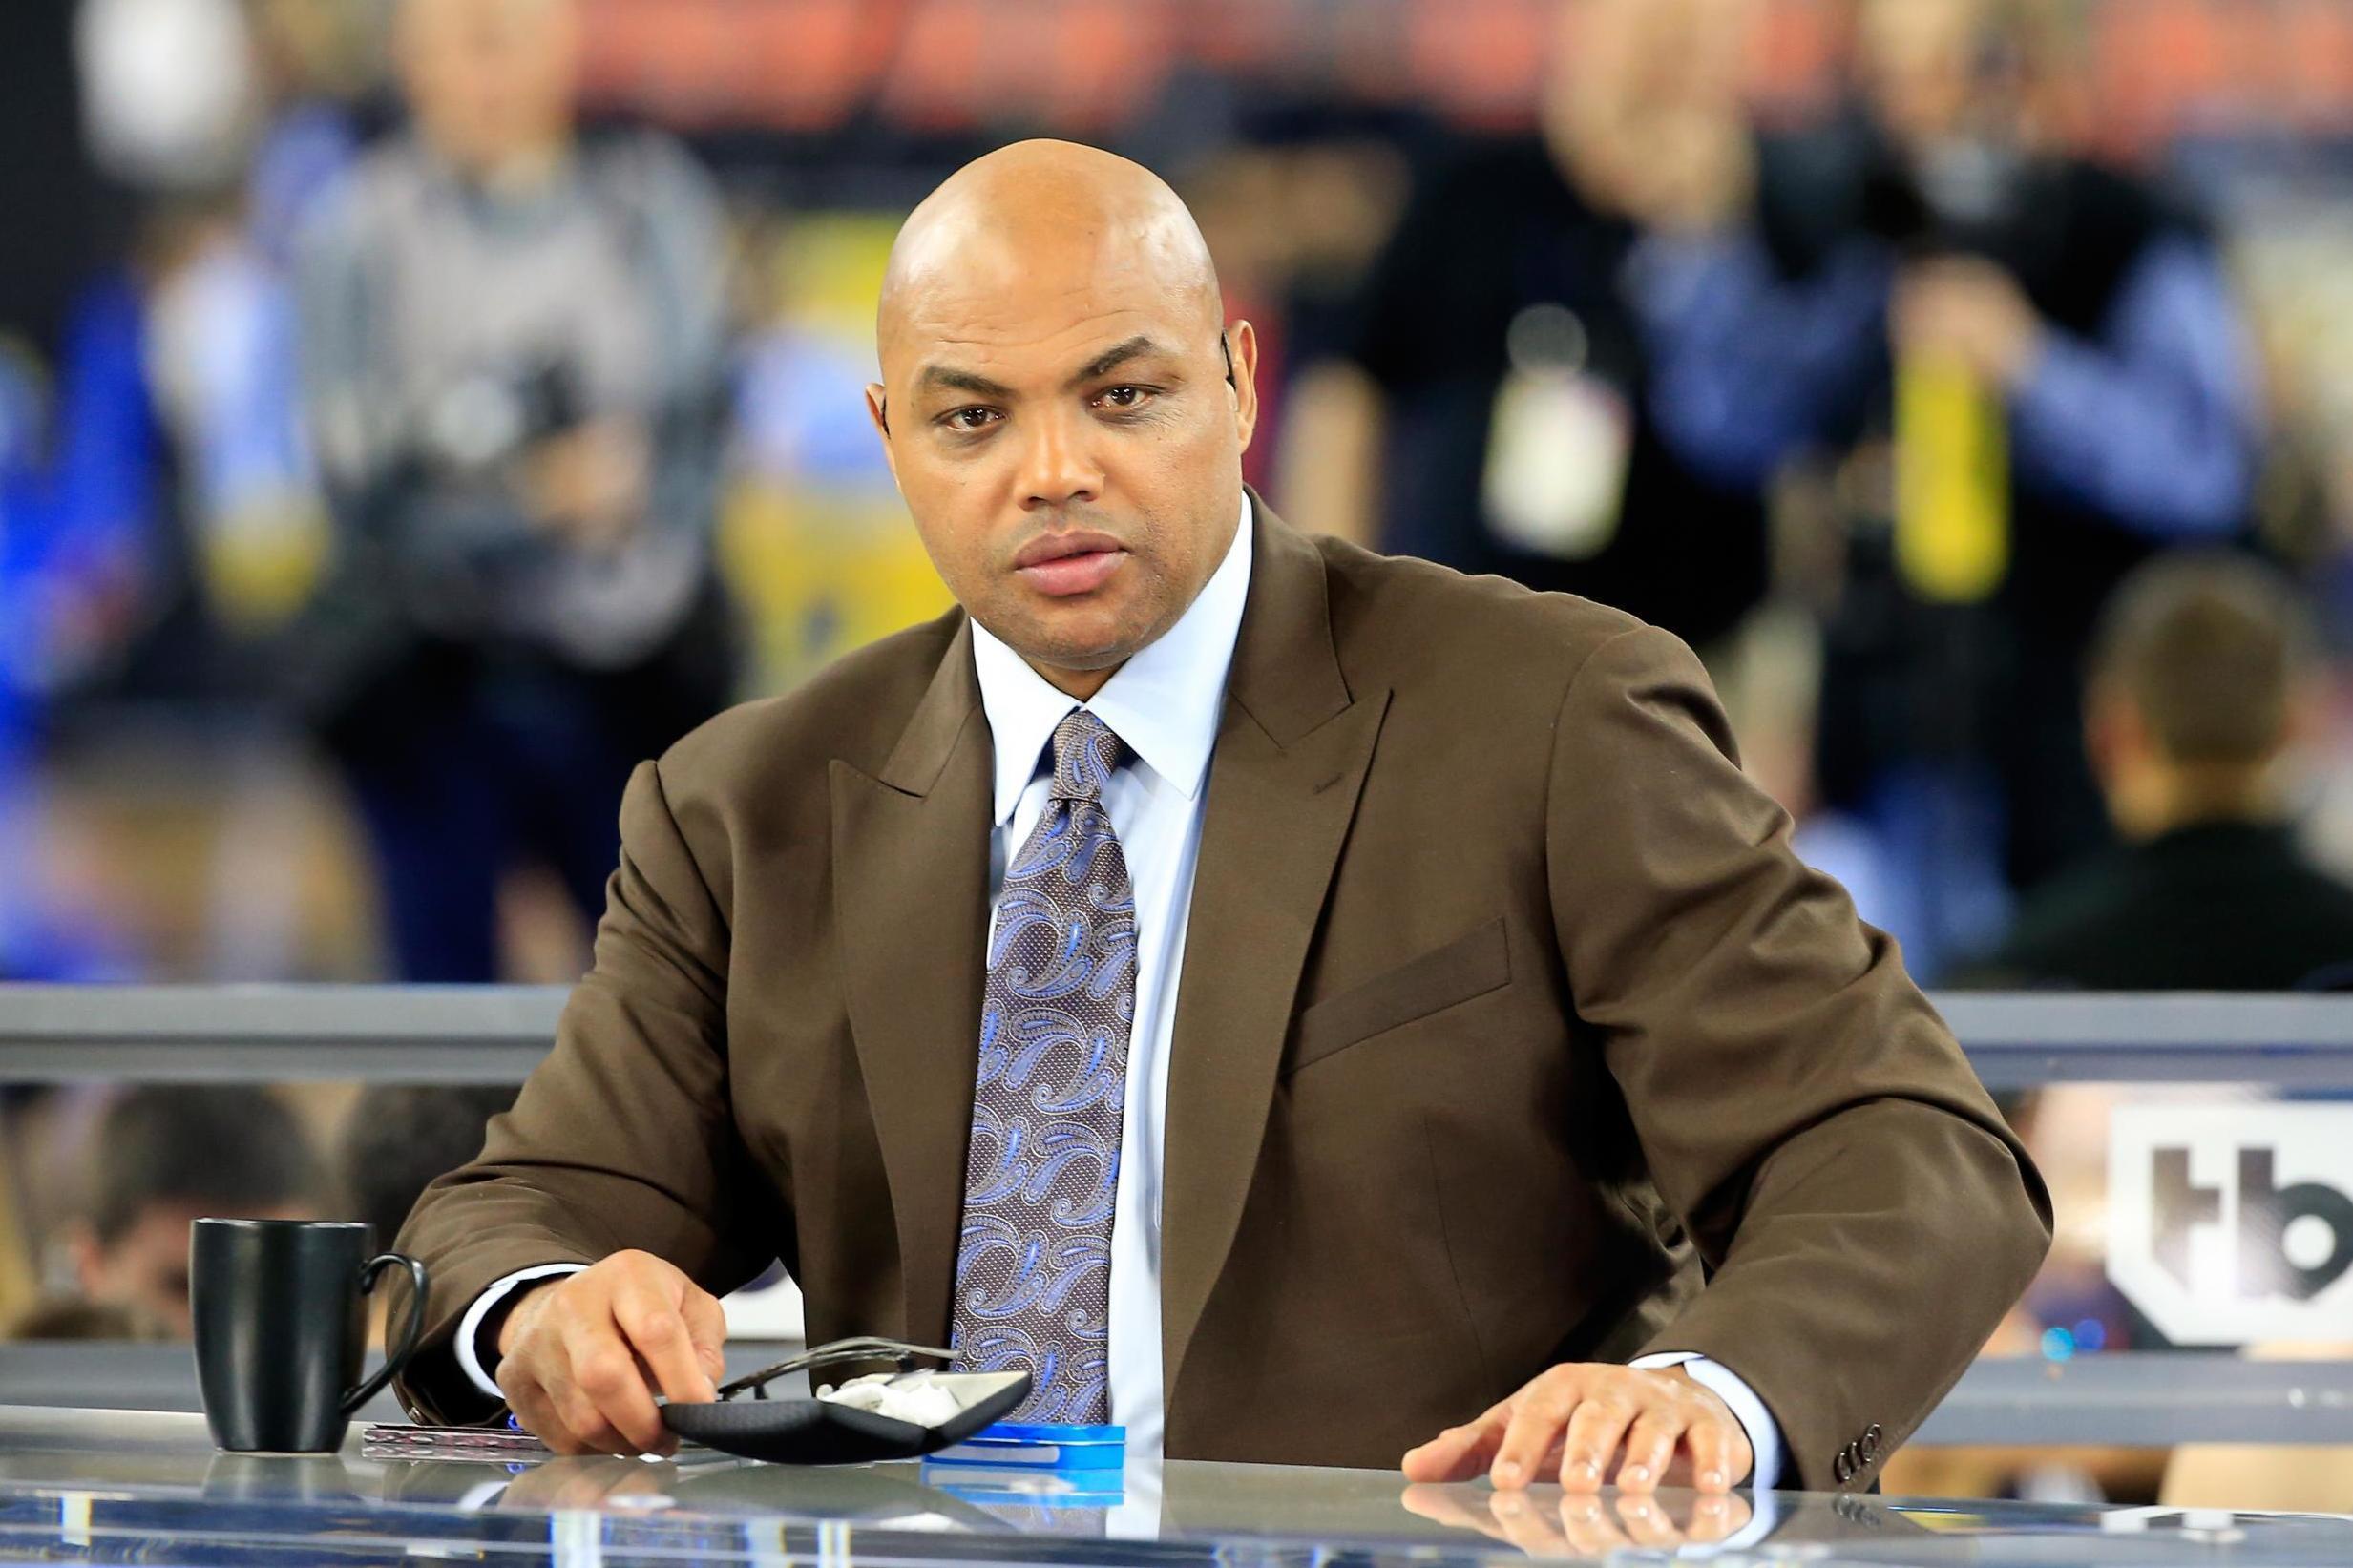 Charles Barkley never forgets where he came from